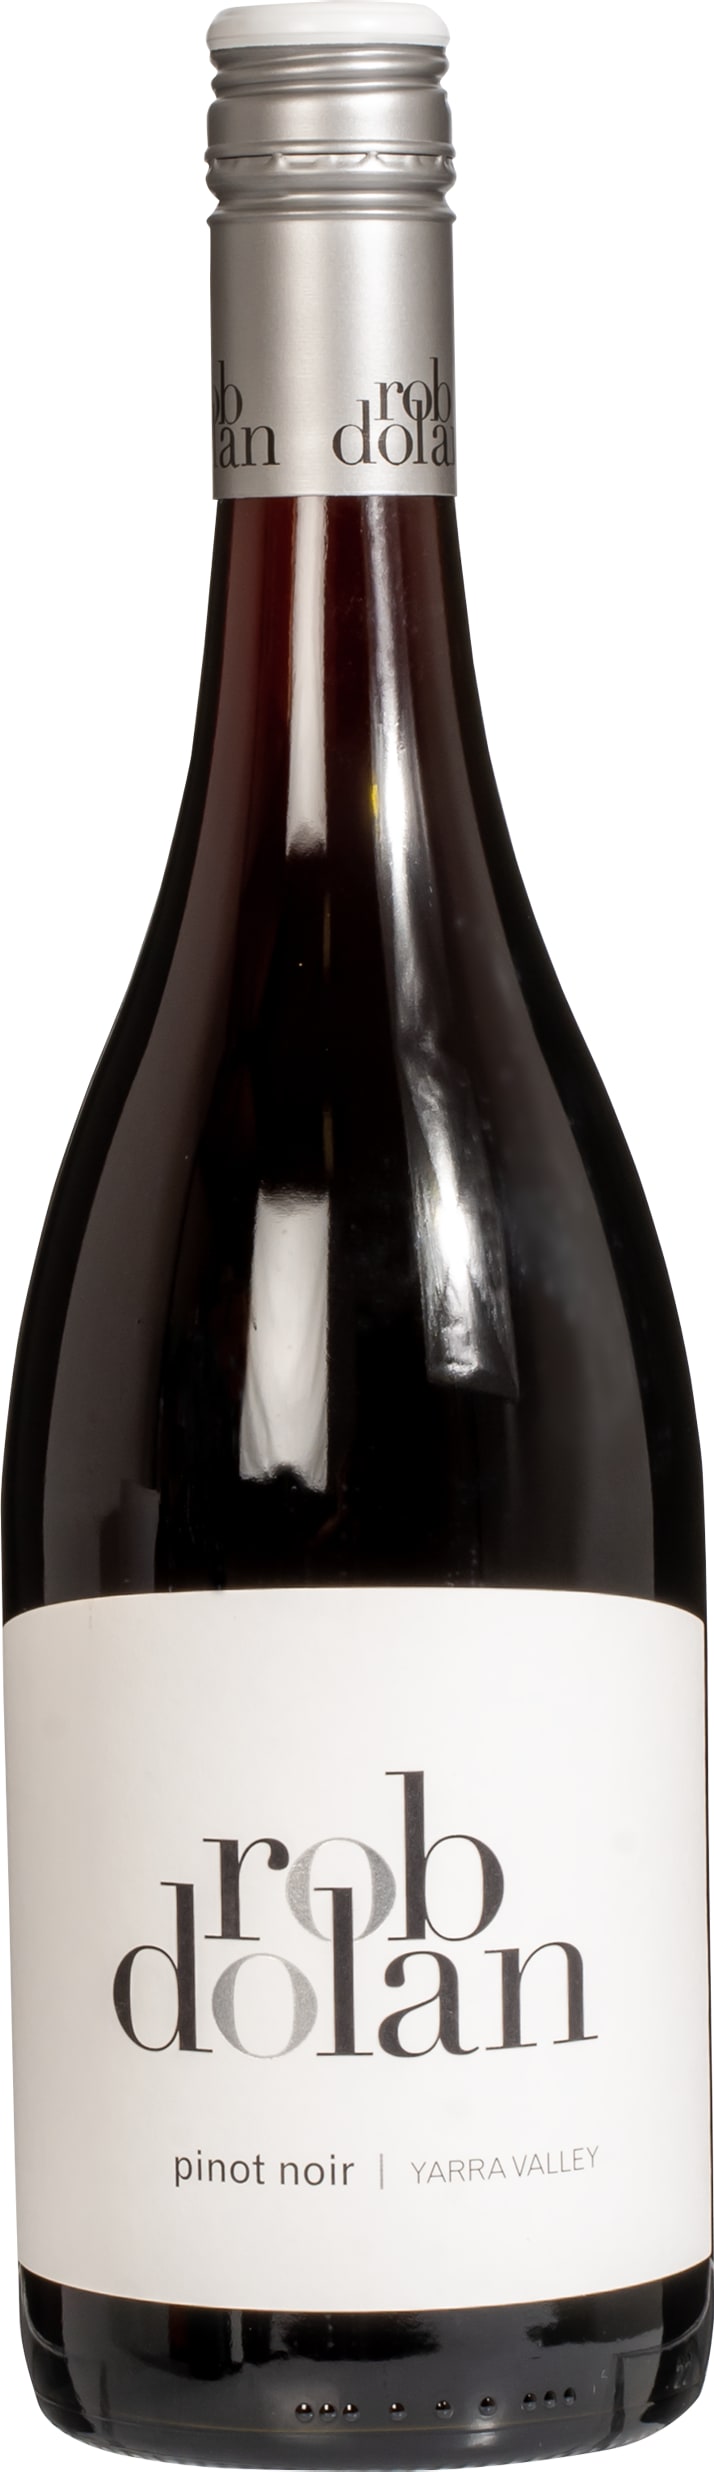 Rob Dolan White Label Pinot Noir 2019 75cl - Buy Rob Dolan Wines from GREAT WINES DIRECT wine shop